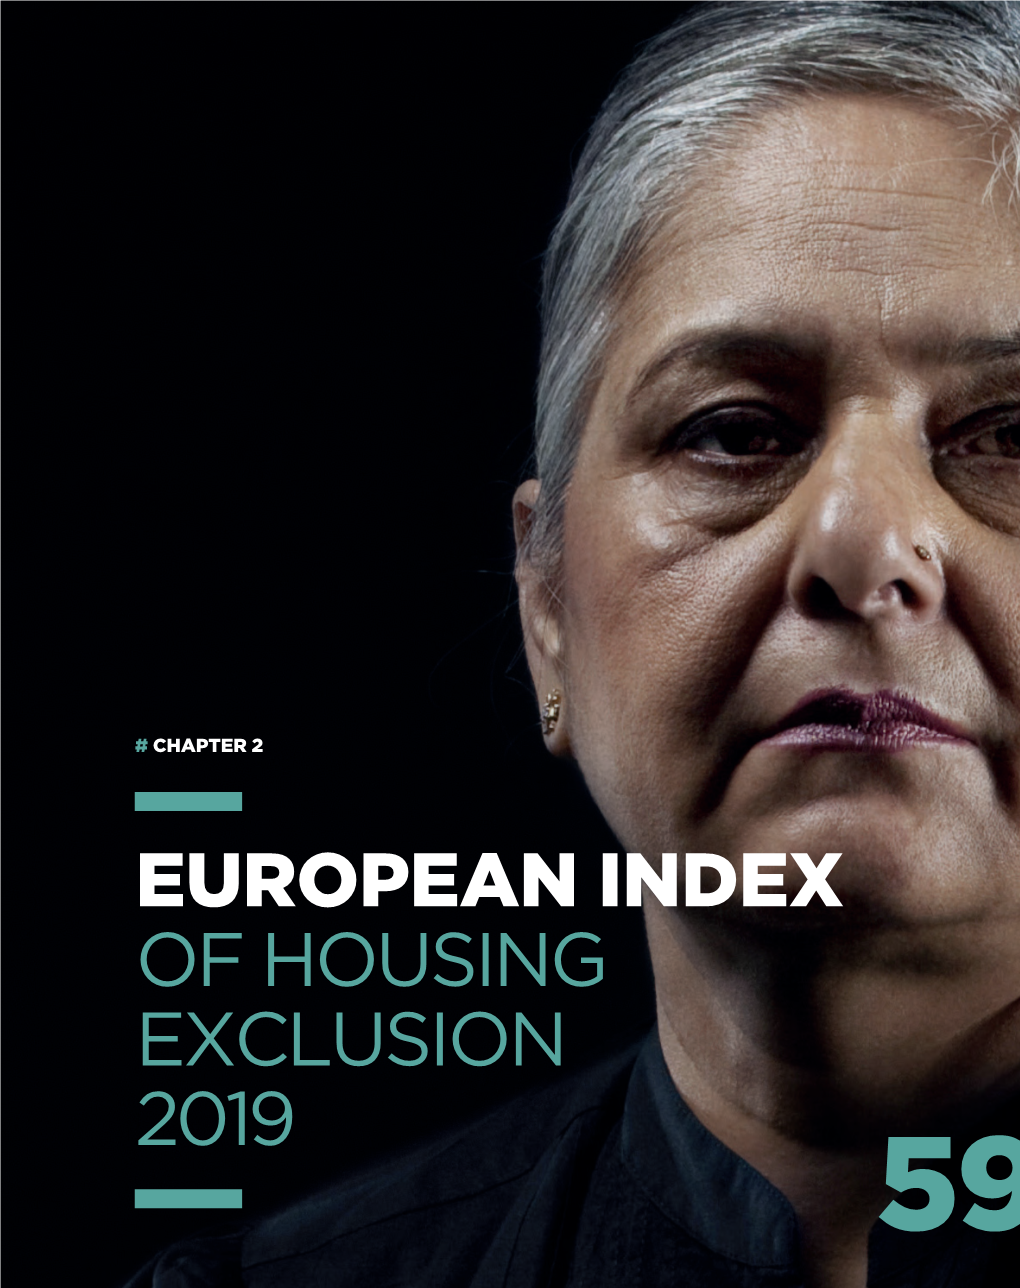 European Index of Housing Exclusion 2019 59 # Chapter 2 European Index of Housing Exclusion 2019